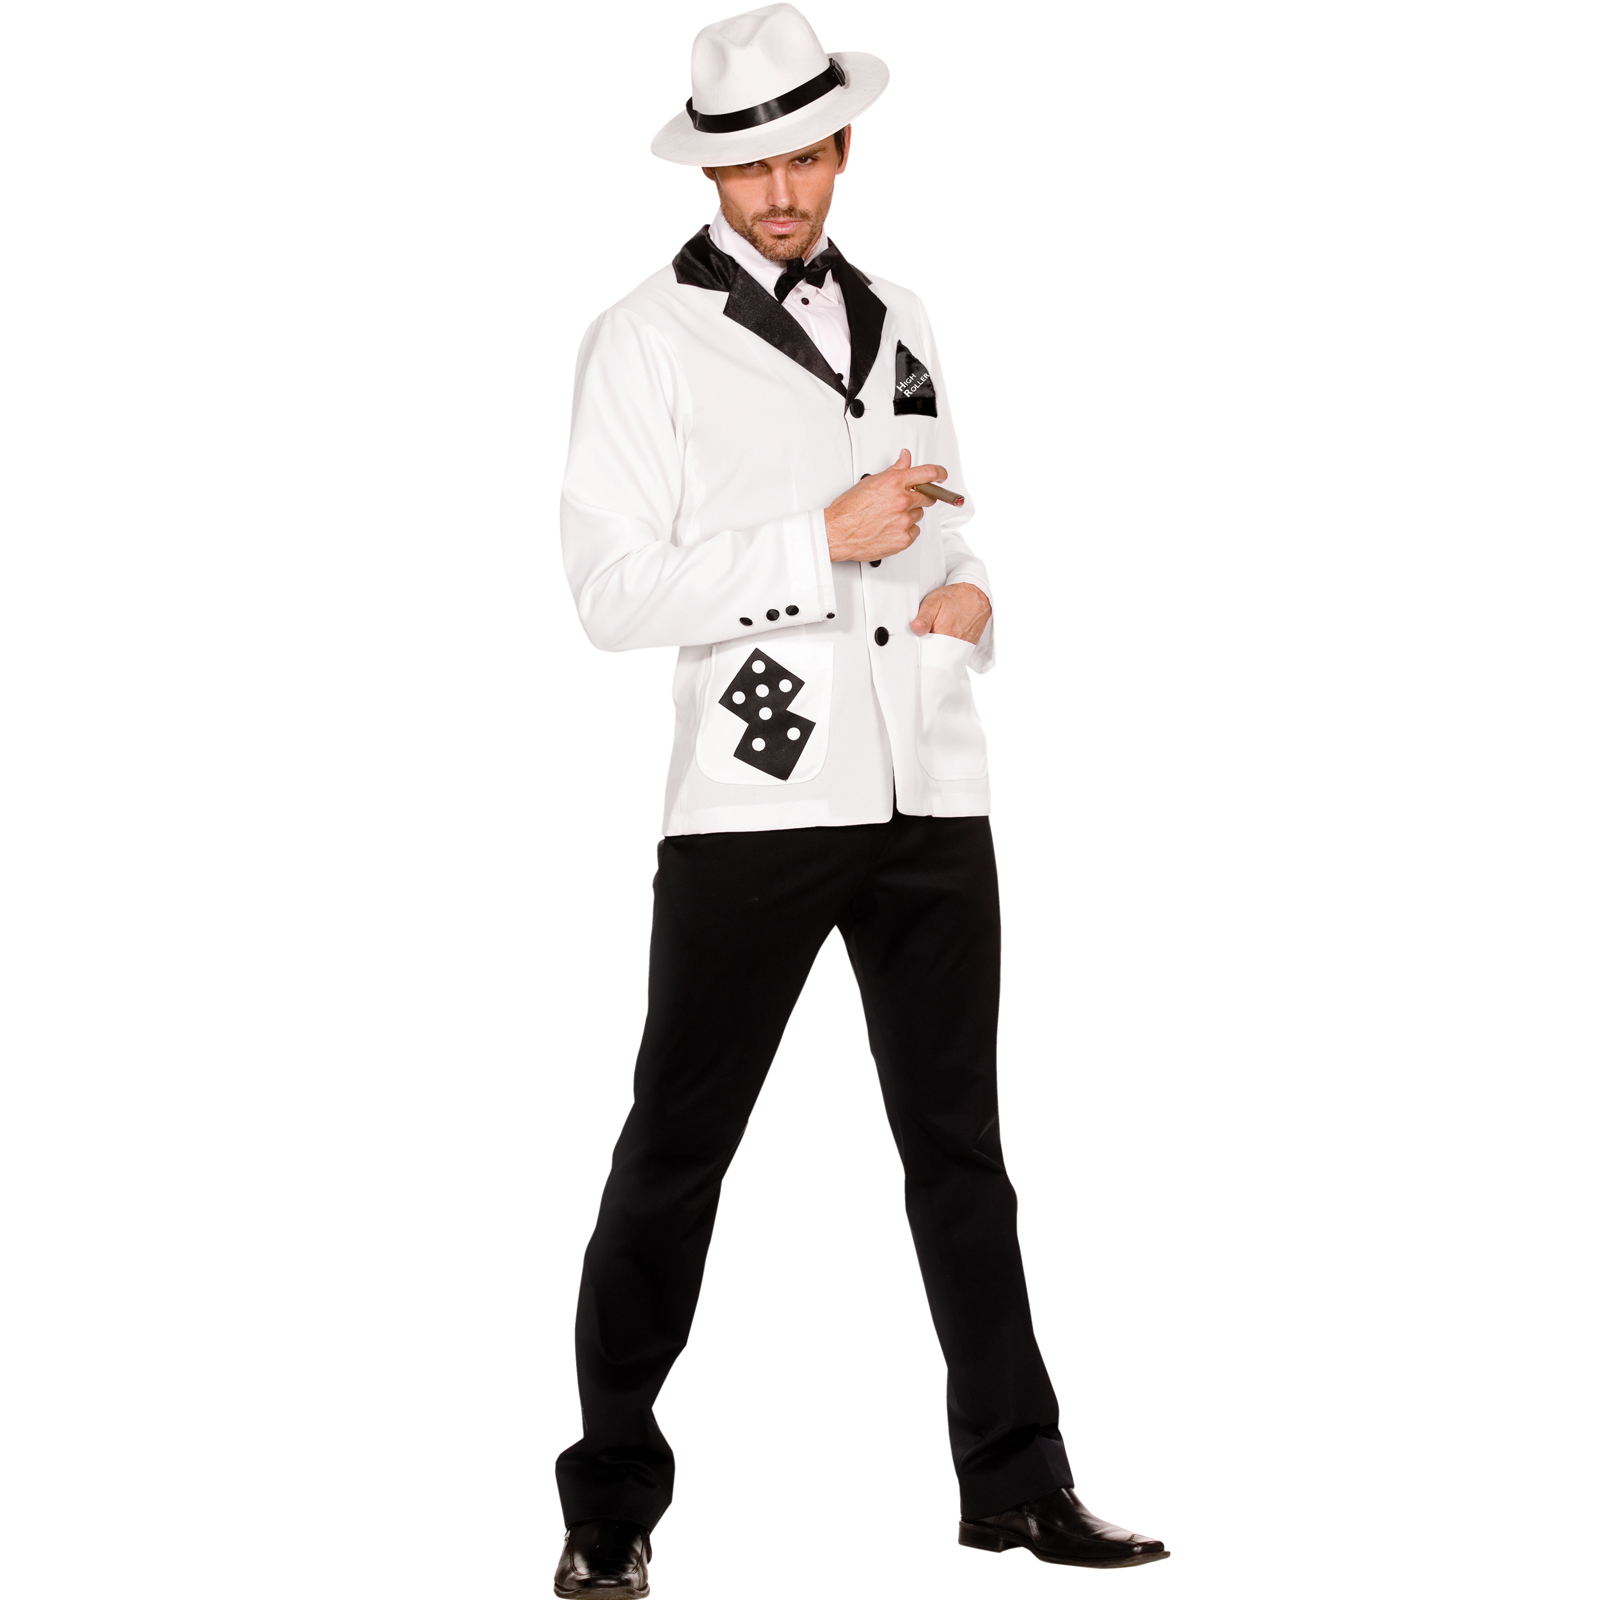 Dreamgirl Men's High Rolling Hunk Adult Costume - Large